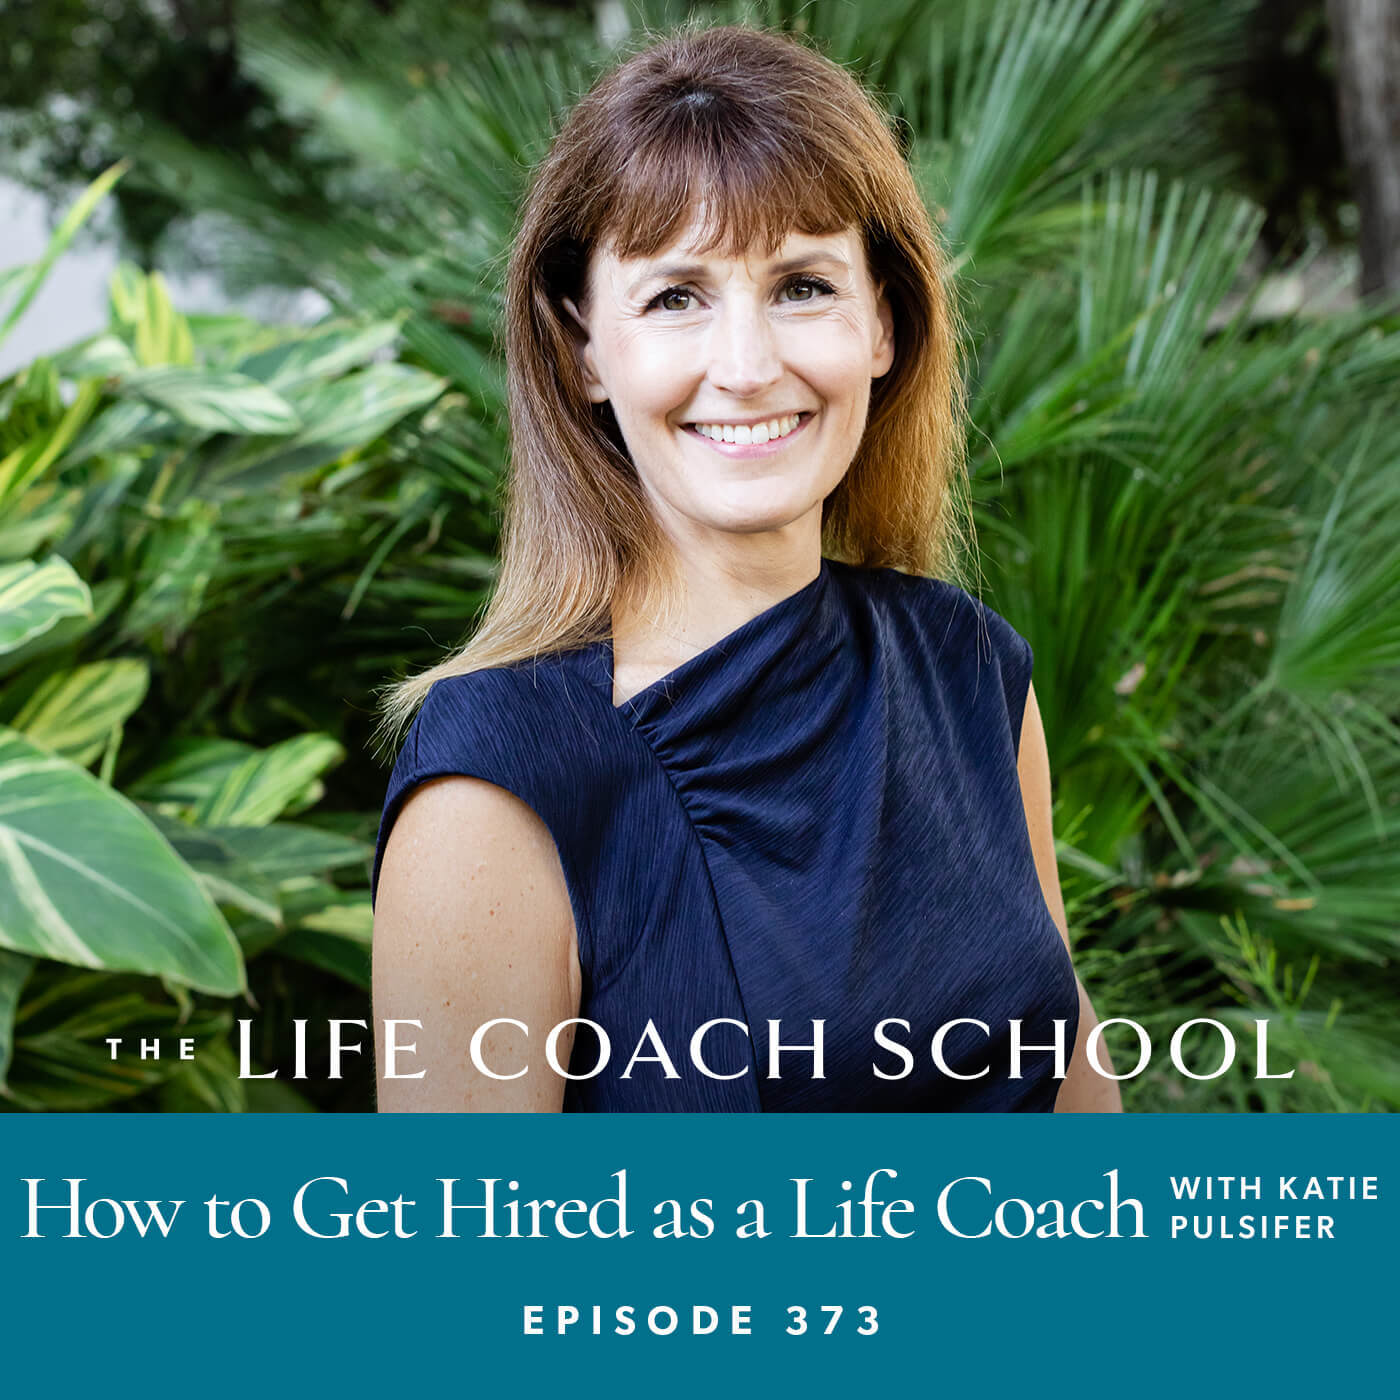 The Life Coach School Podcast with Brooke Castillo | How to Get Hired as a Life Coach with Katie Pulsifer